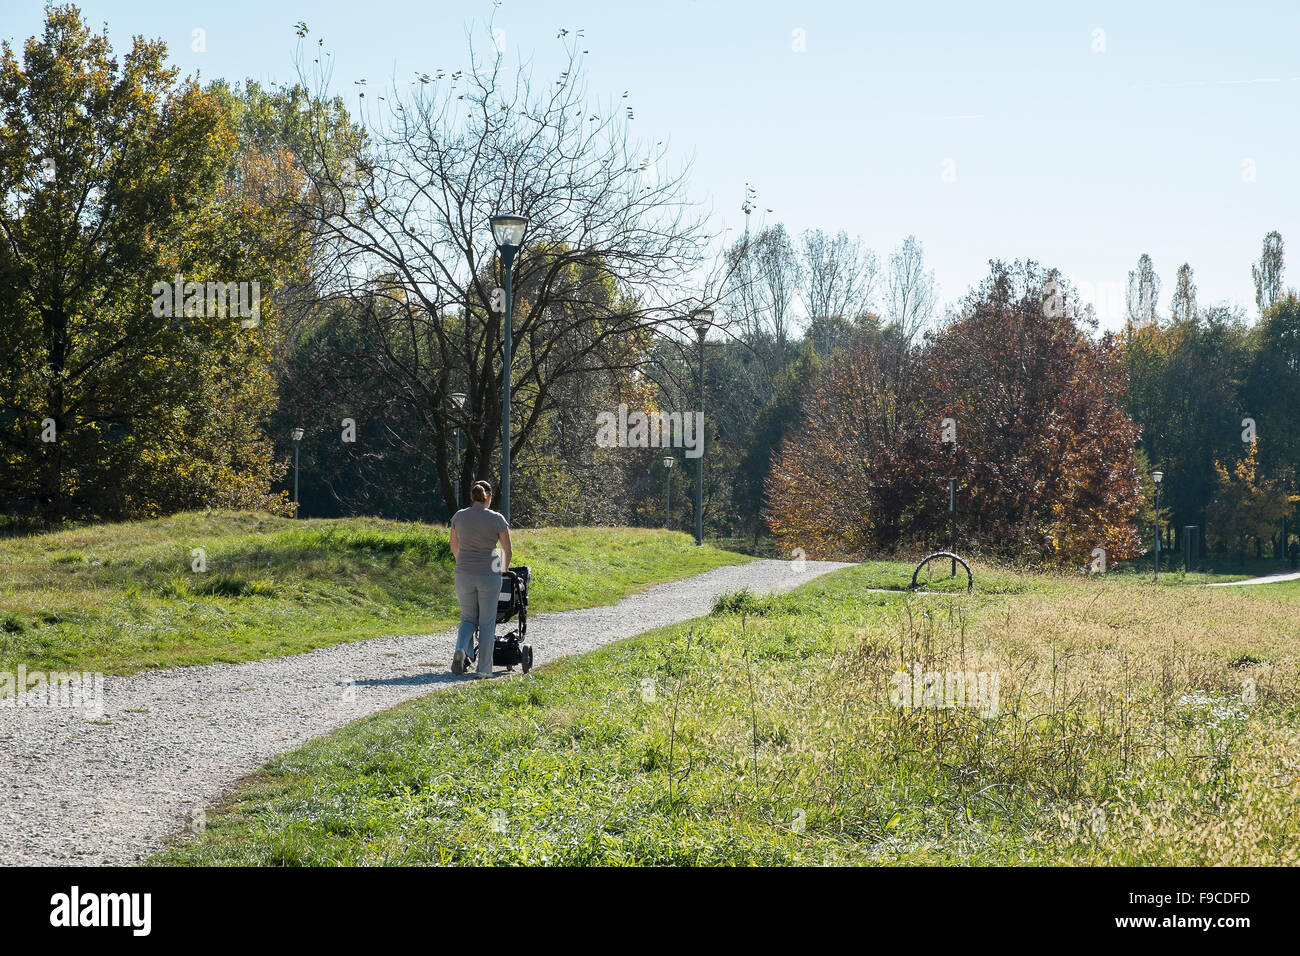 a mother walking with pram in park Stock Photo